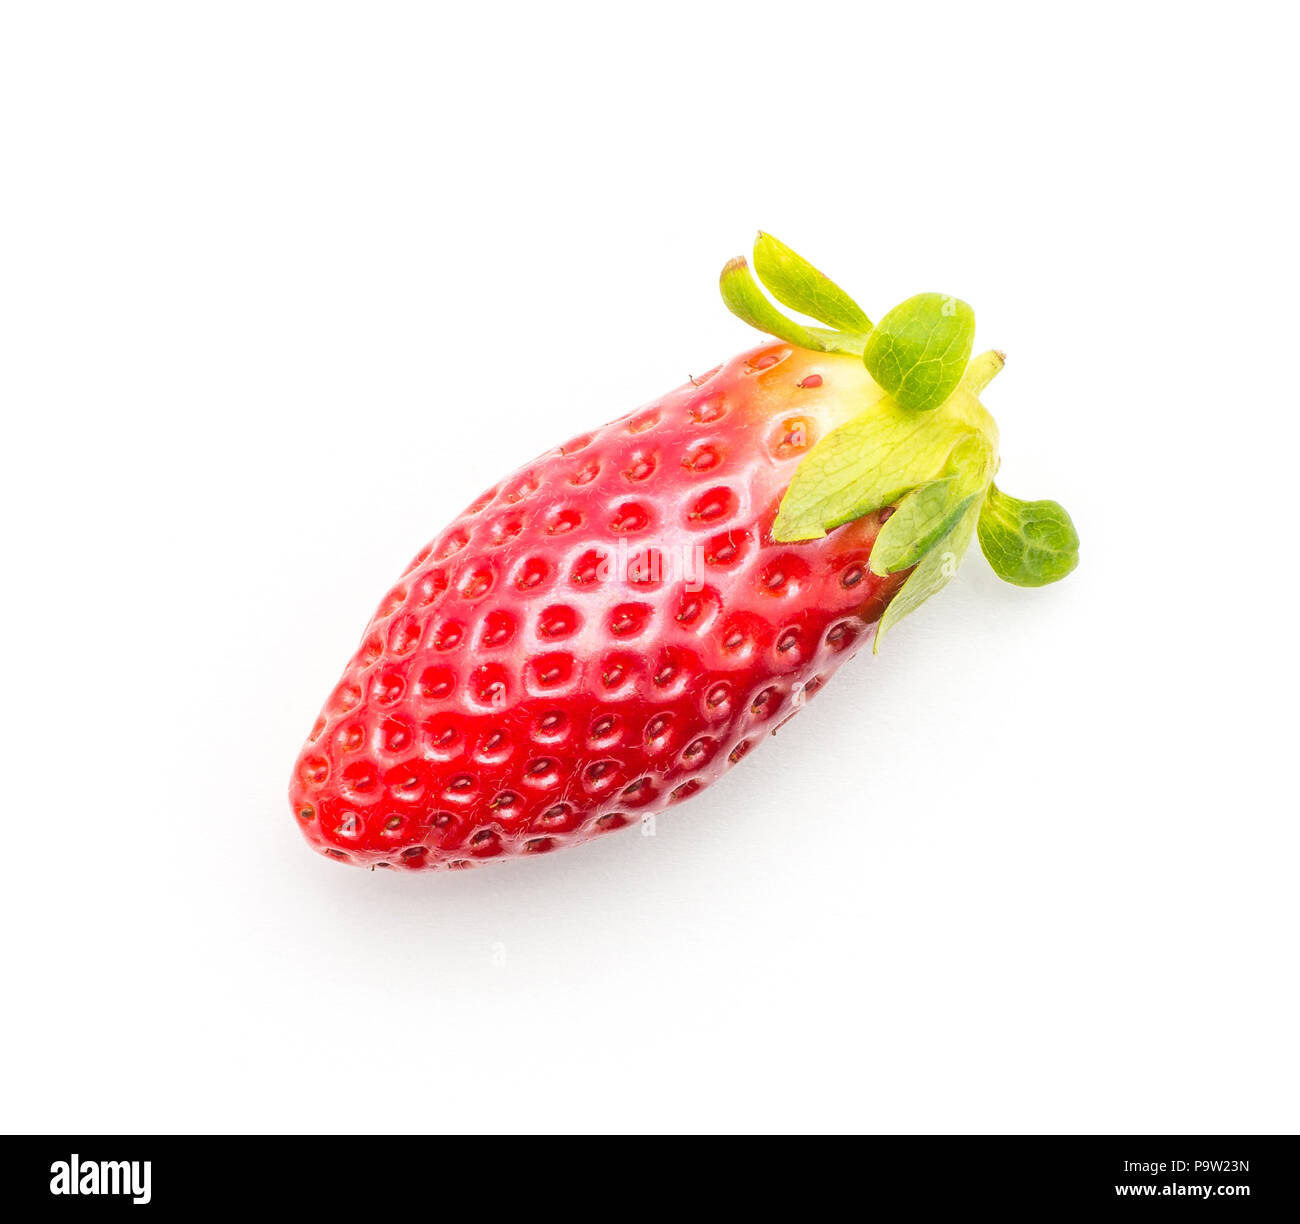 Garden strawberry top view isolated on white background long one Stock Photo